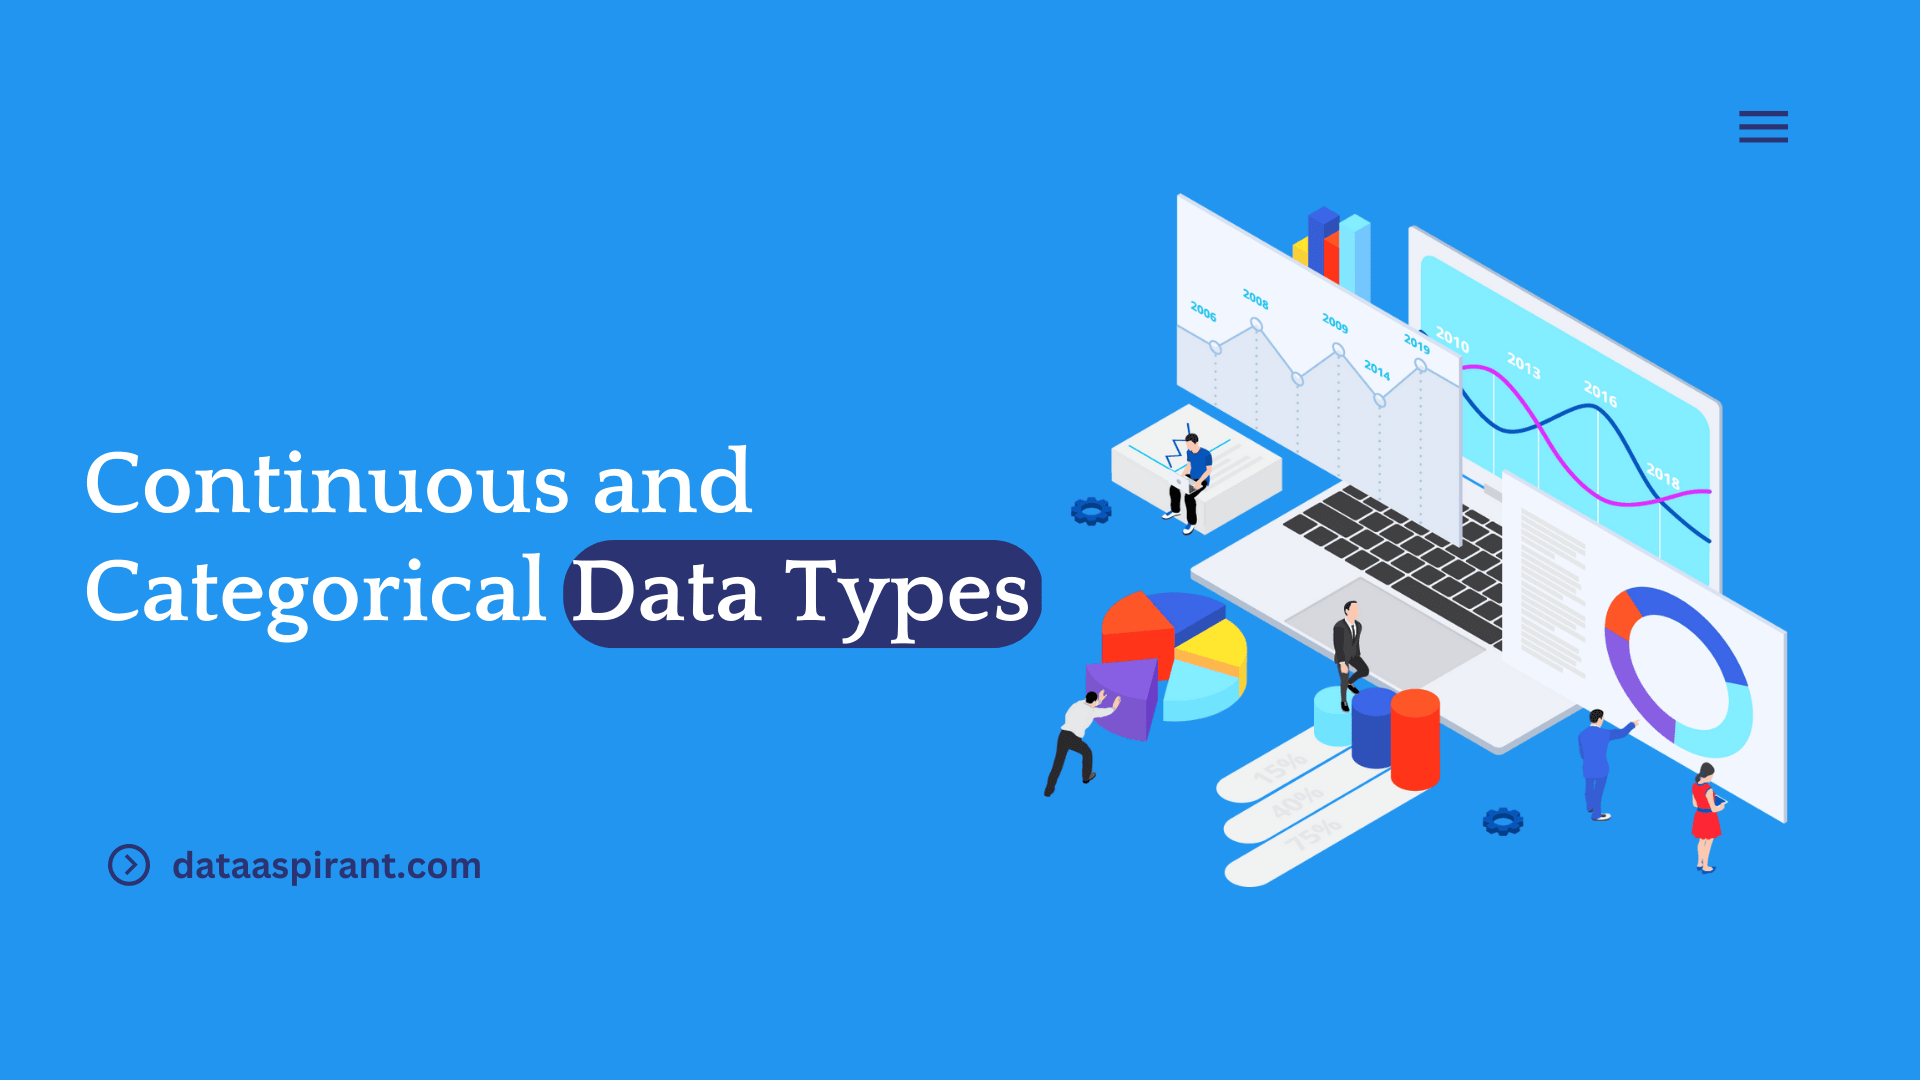 Introduction to Continuous and Categorical Data Types